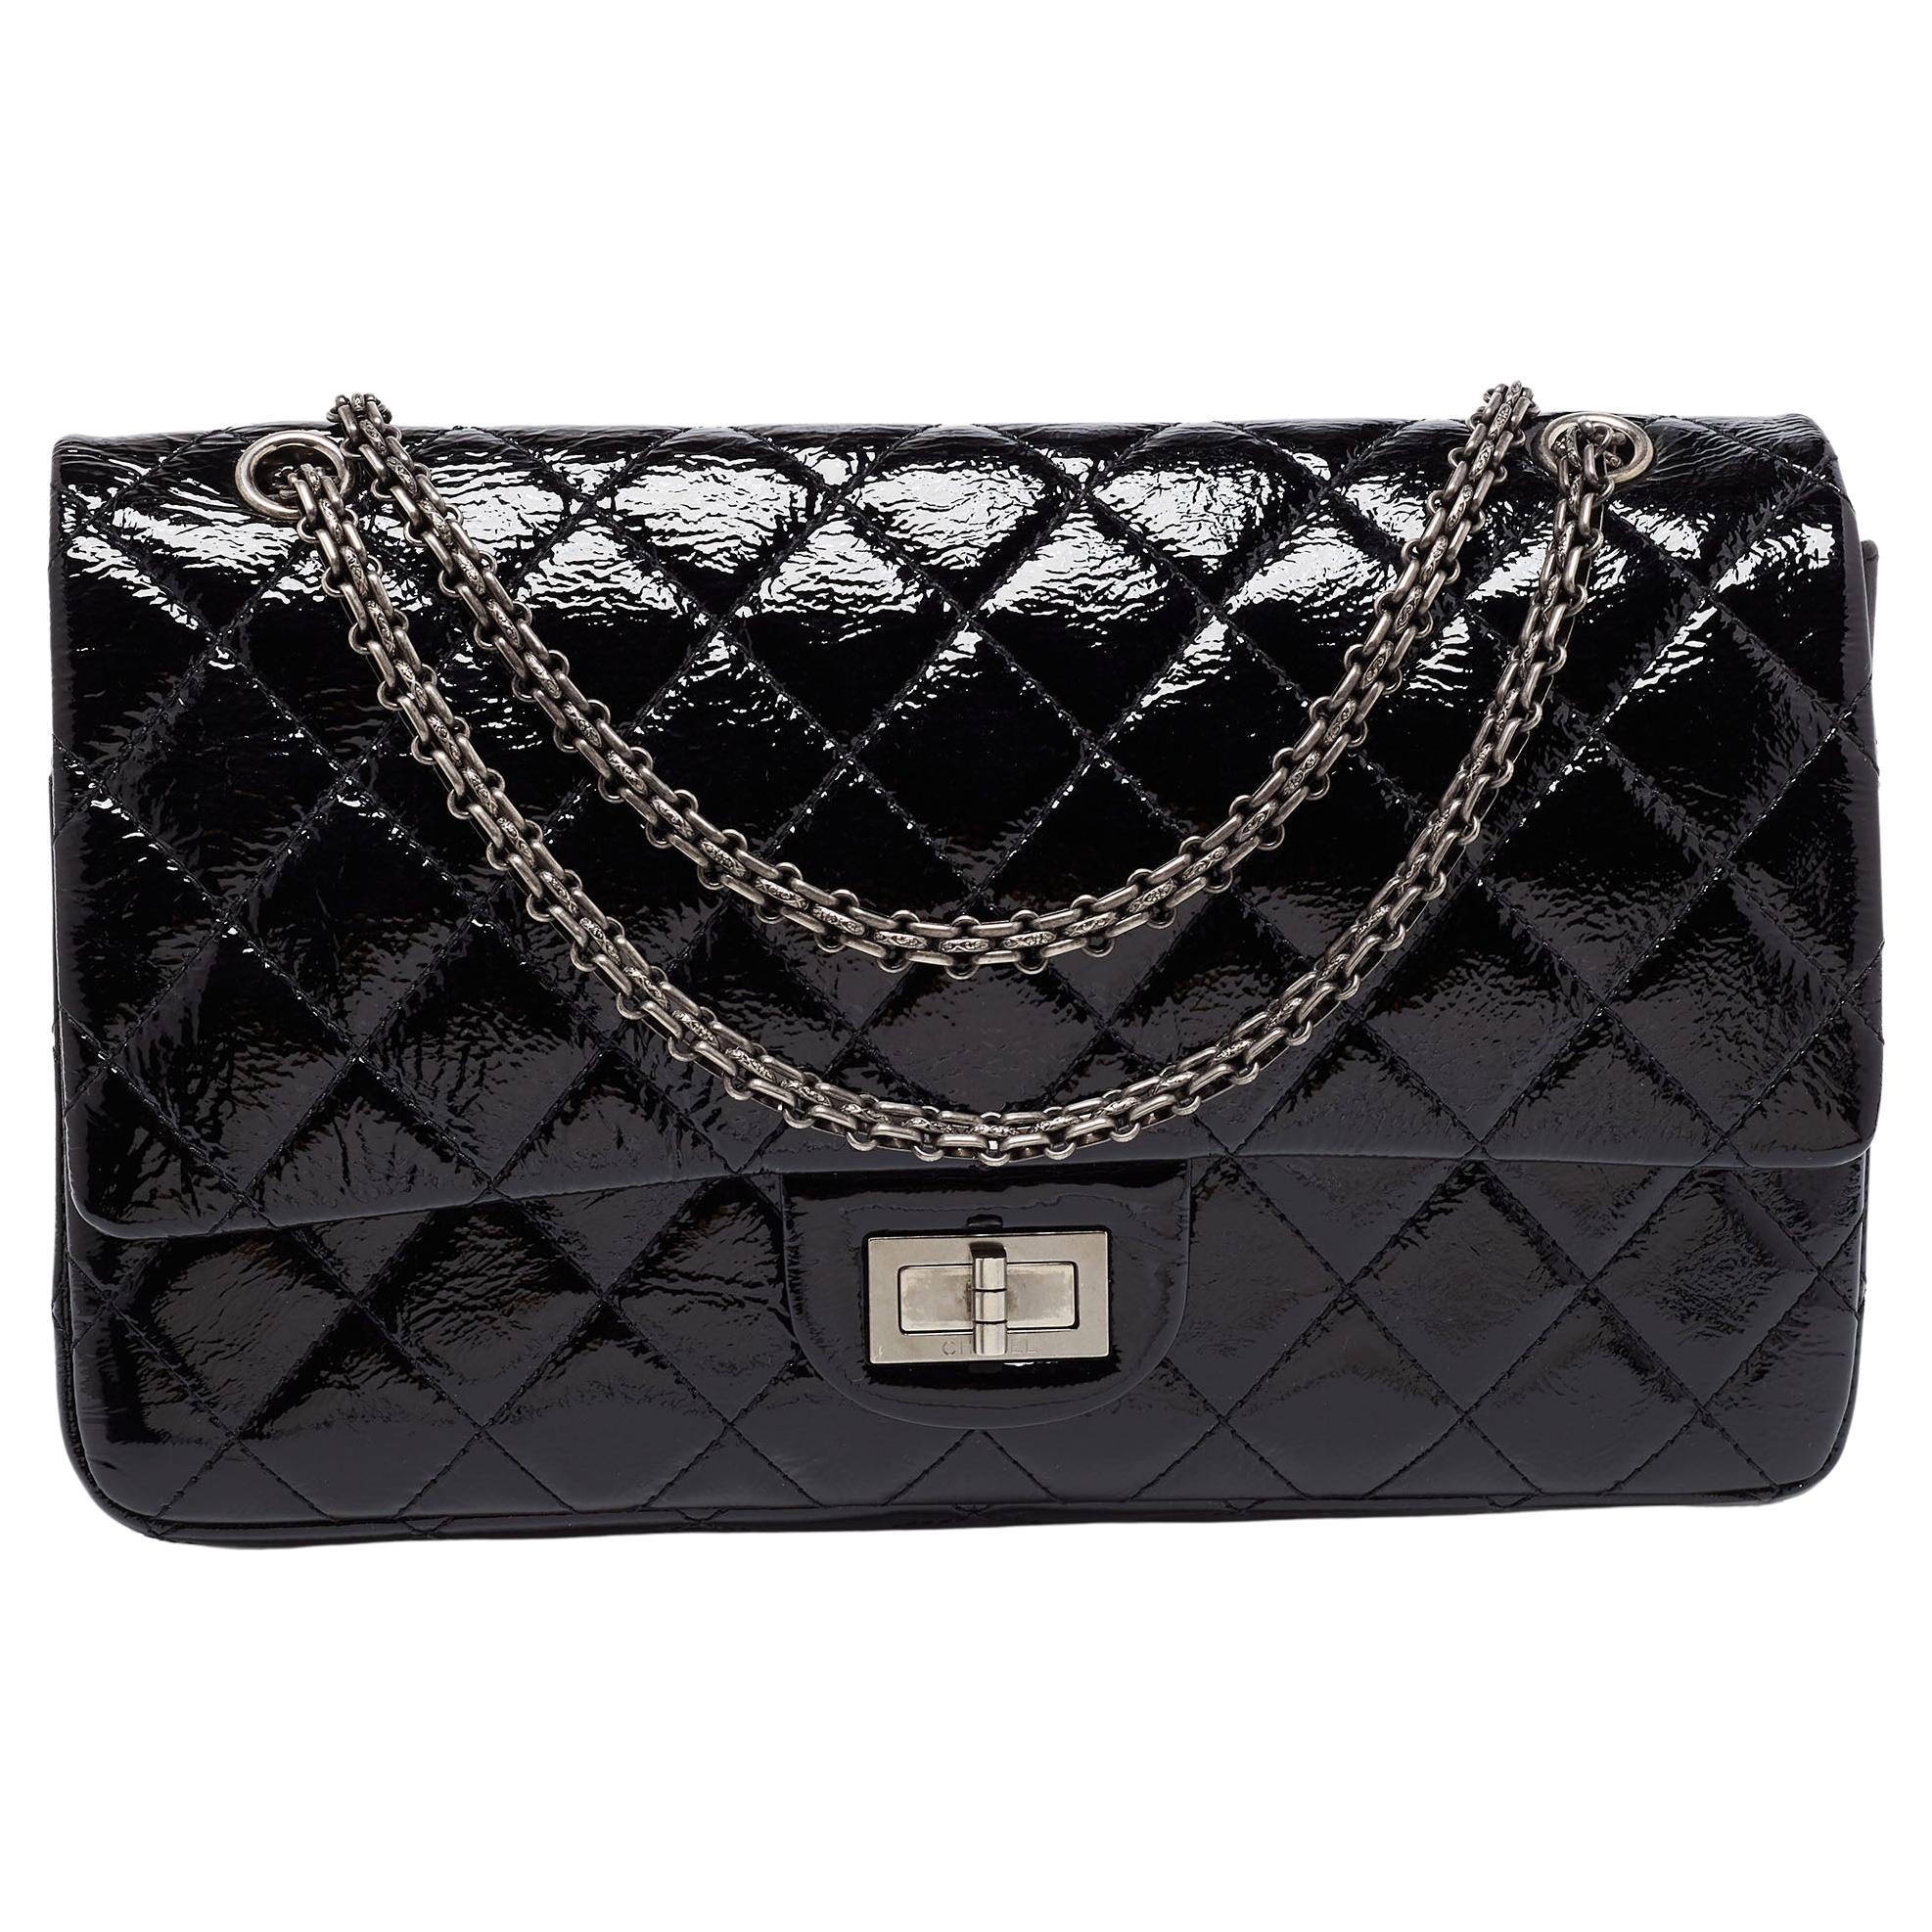 Chanel Black Quilted Patent Leather Reissue 2.55 Classic 227 Flap Bag